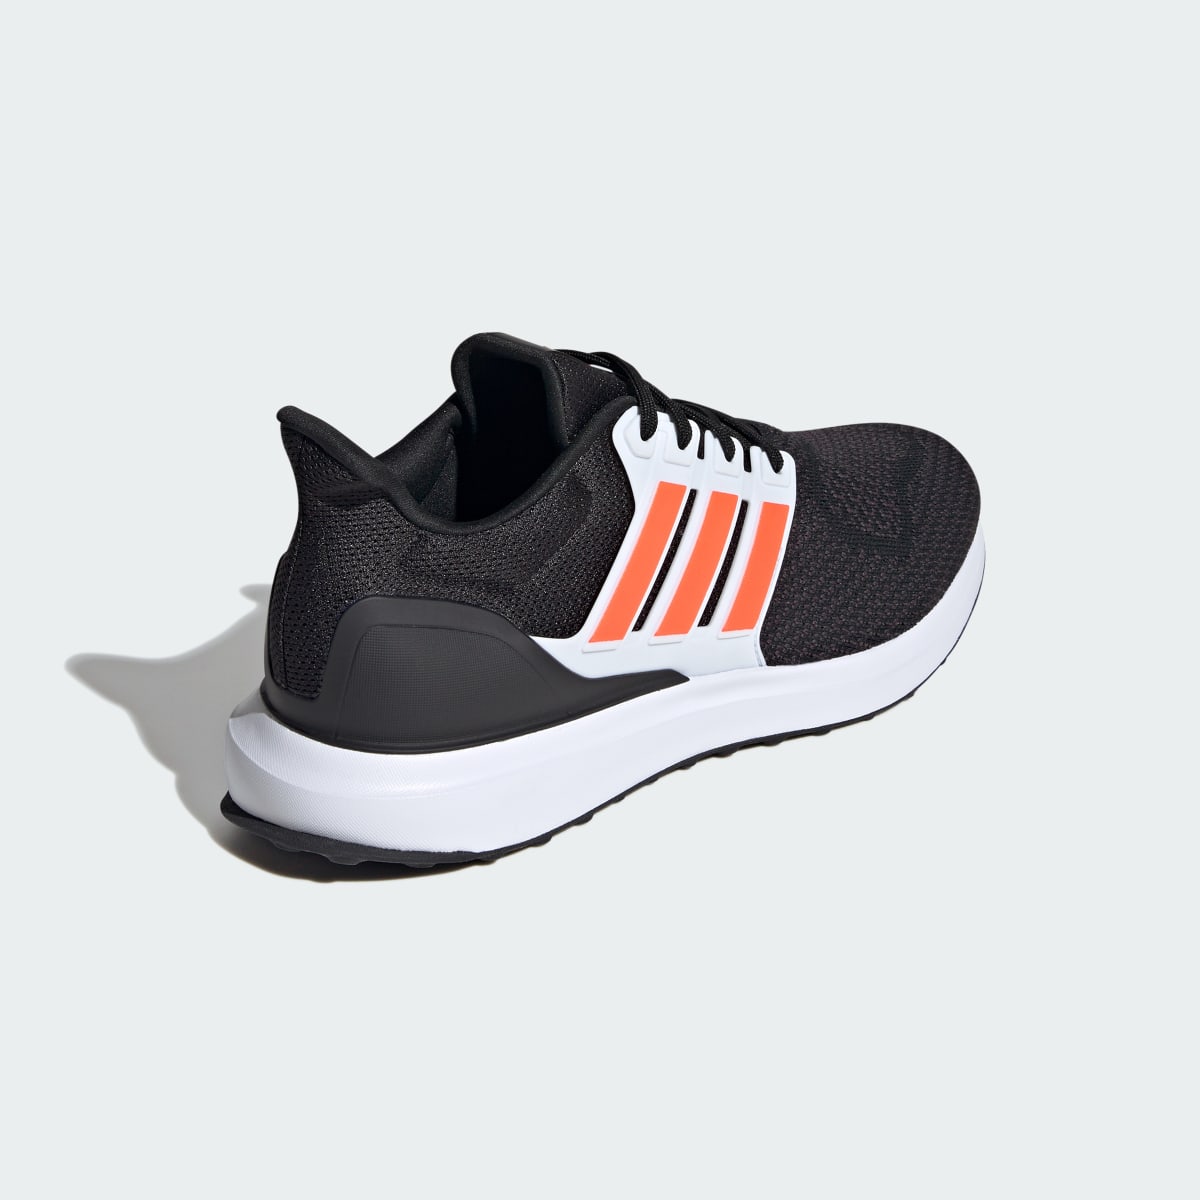 Adidas UBounce DNA Shoes. 6